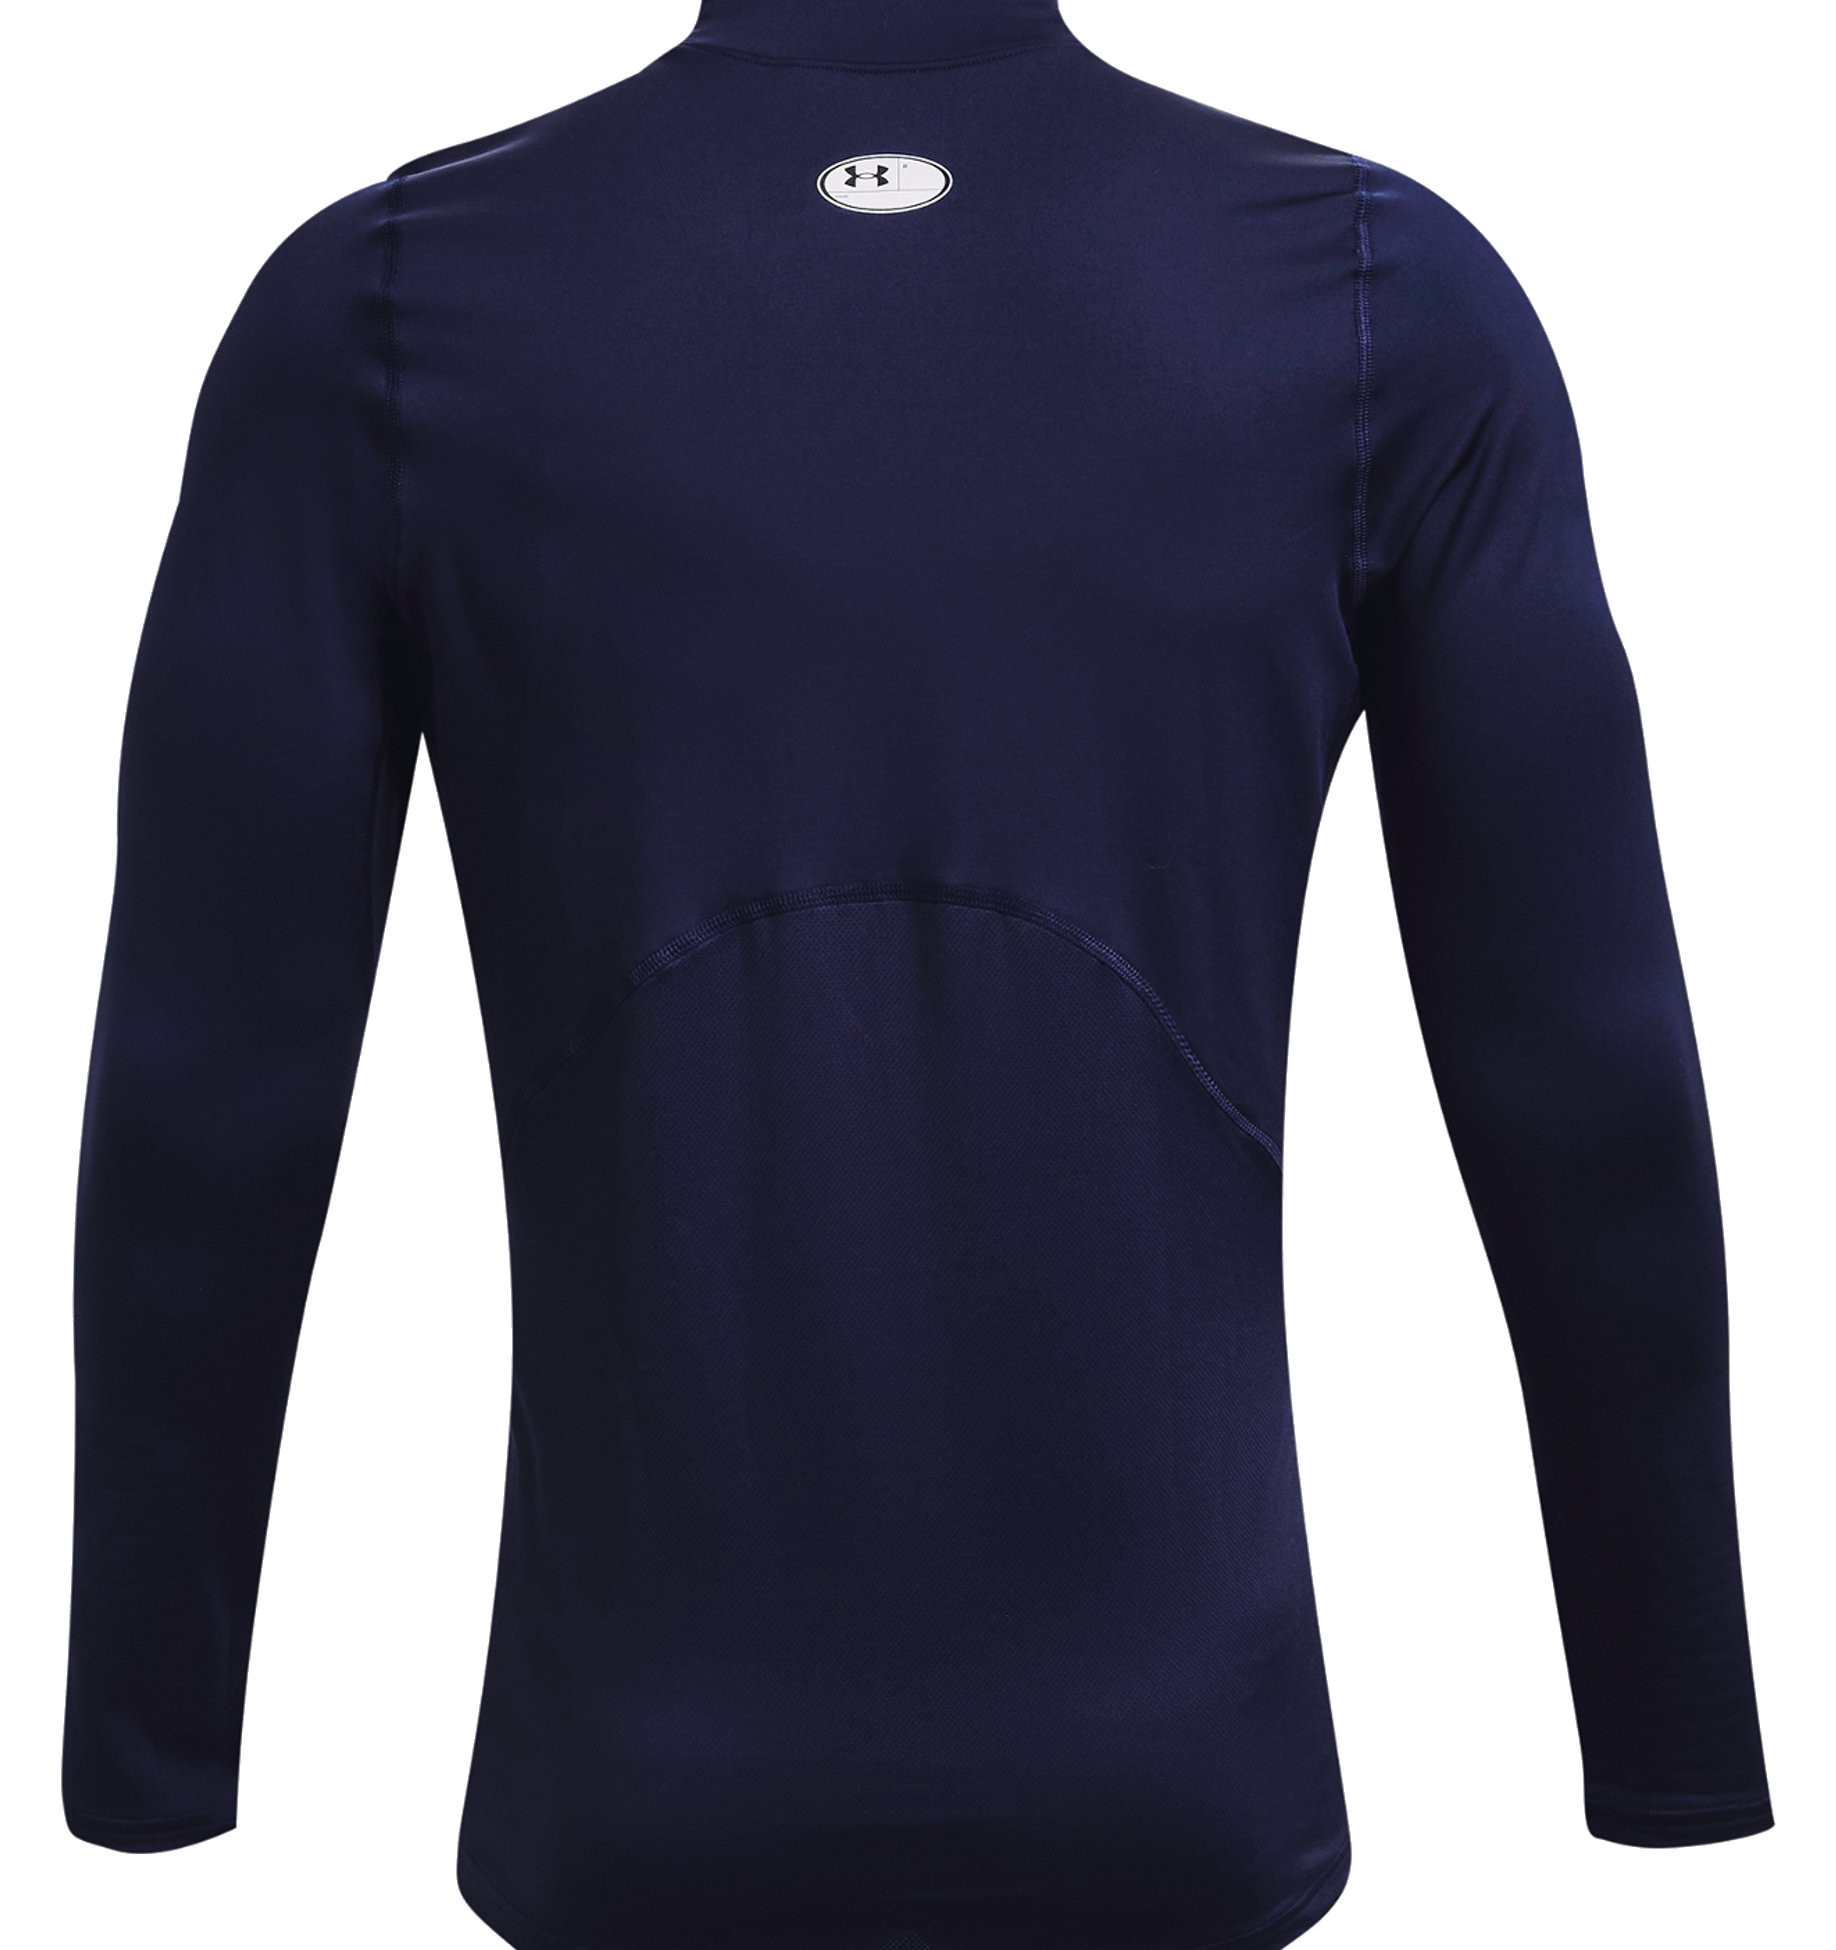 Under Armour ColdGear Armour Fitted Mock Navy